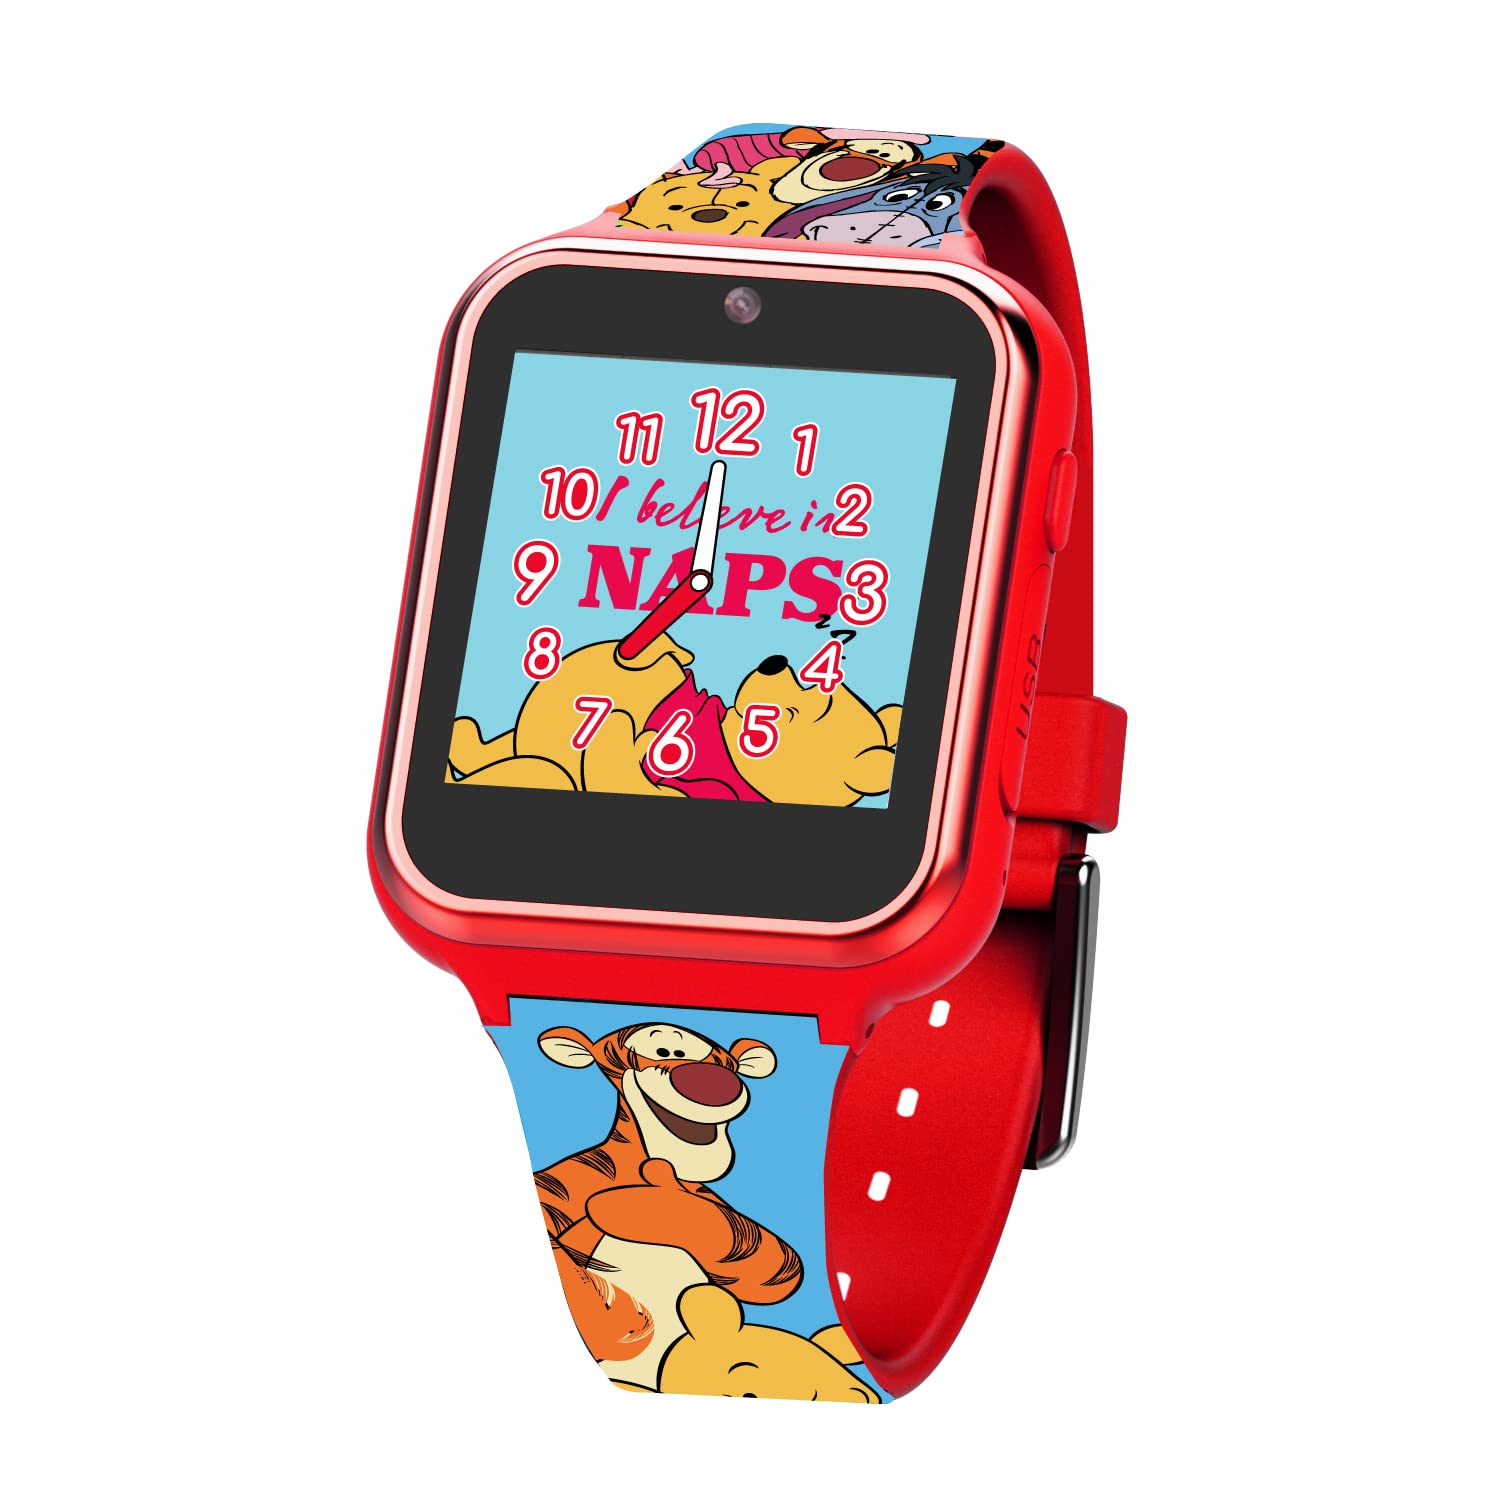 Accutime Winnie The Pooh Kids Educational Learning Touchscreen Pink Smart Watch Toy with Multicolor Strap for Girls, Boys, Toddlers - Selfie Cam, Games, Alarm, Calculator, Pedometer (Model: WP4007AZ)